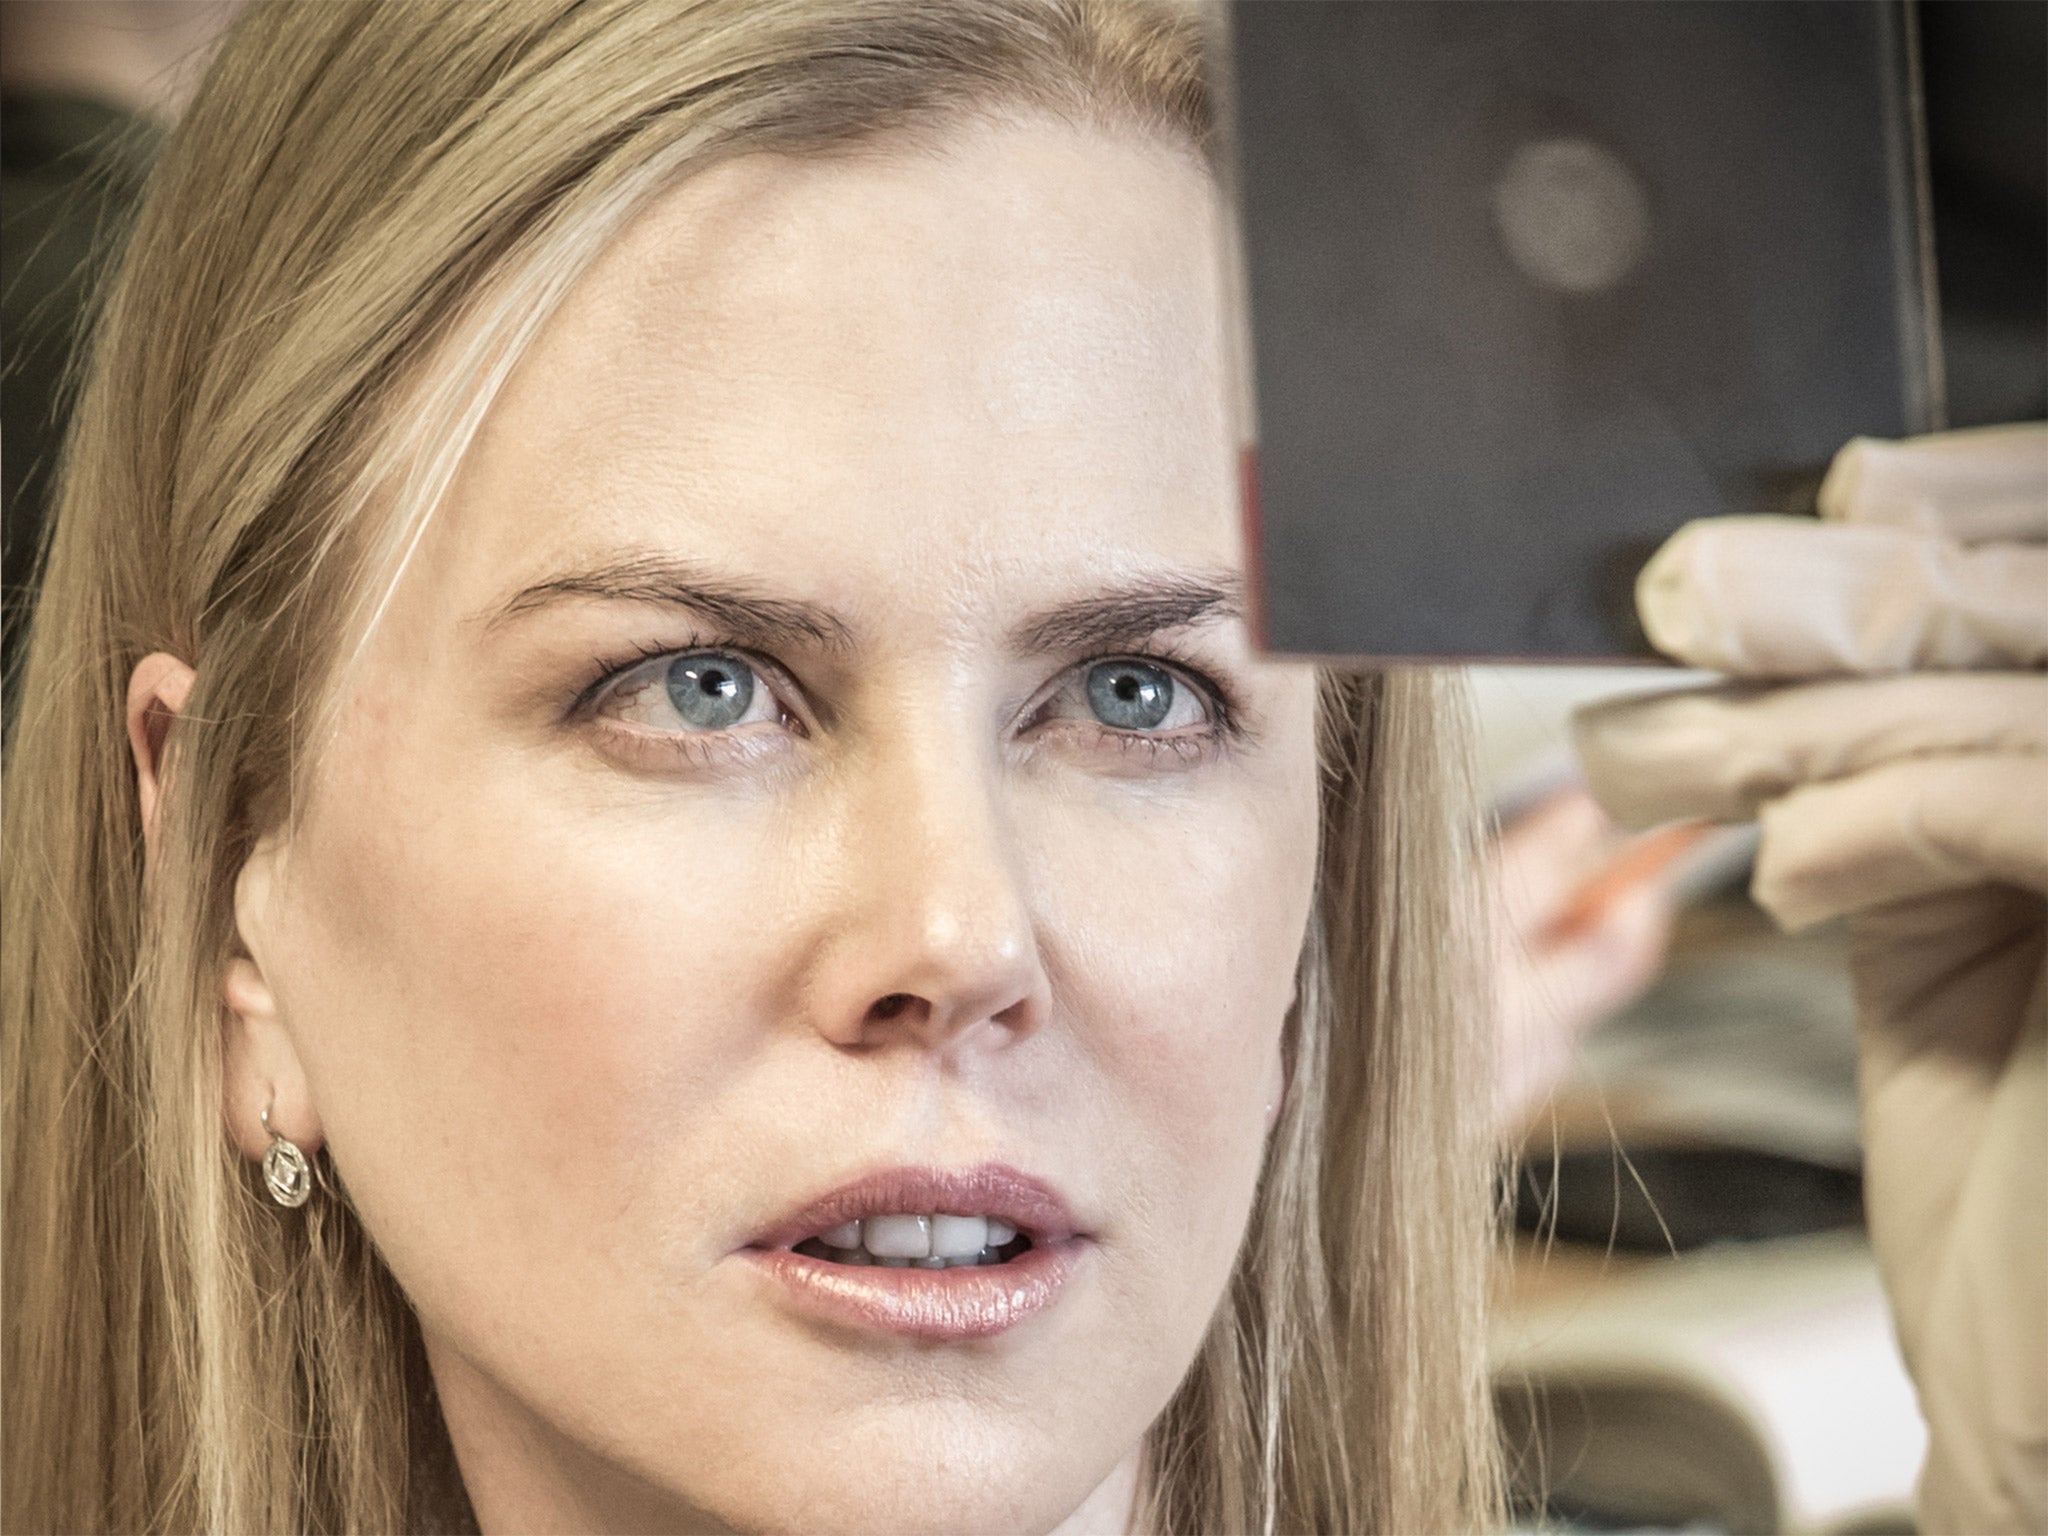 Bigger picture: Nicole Kidman as Rosalind Franklin in Photograph 51